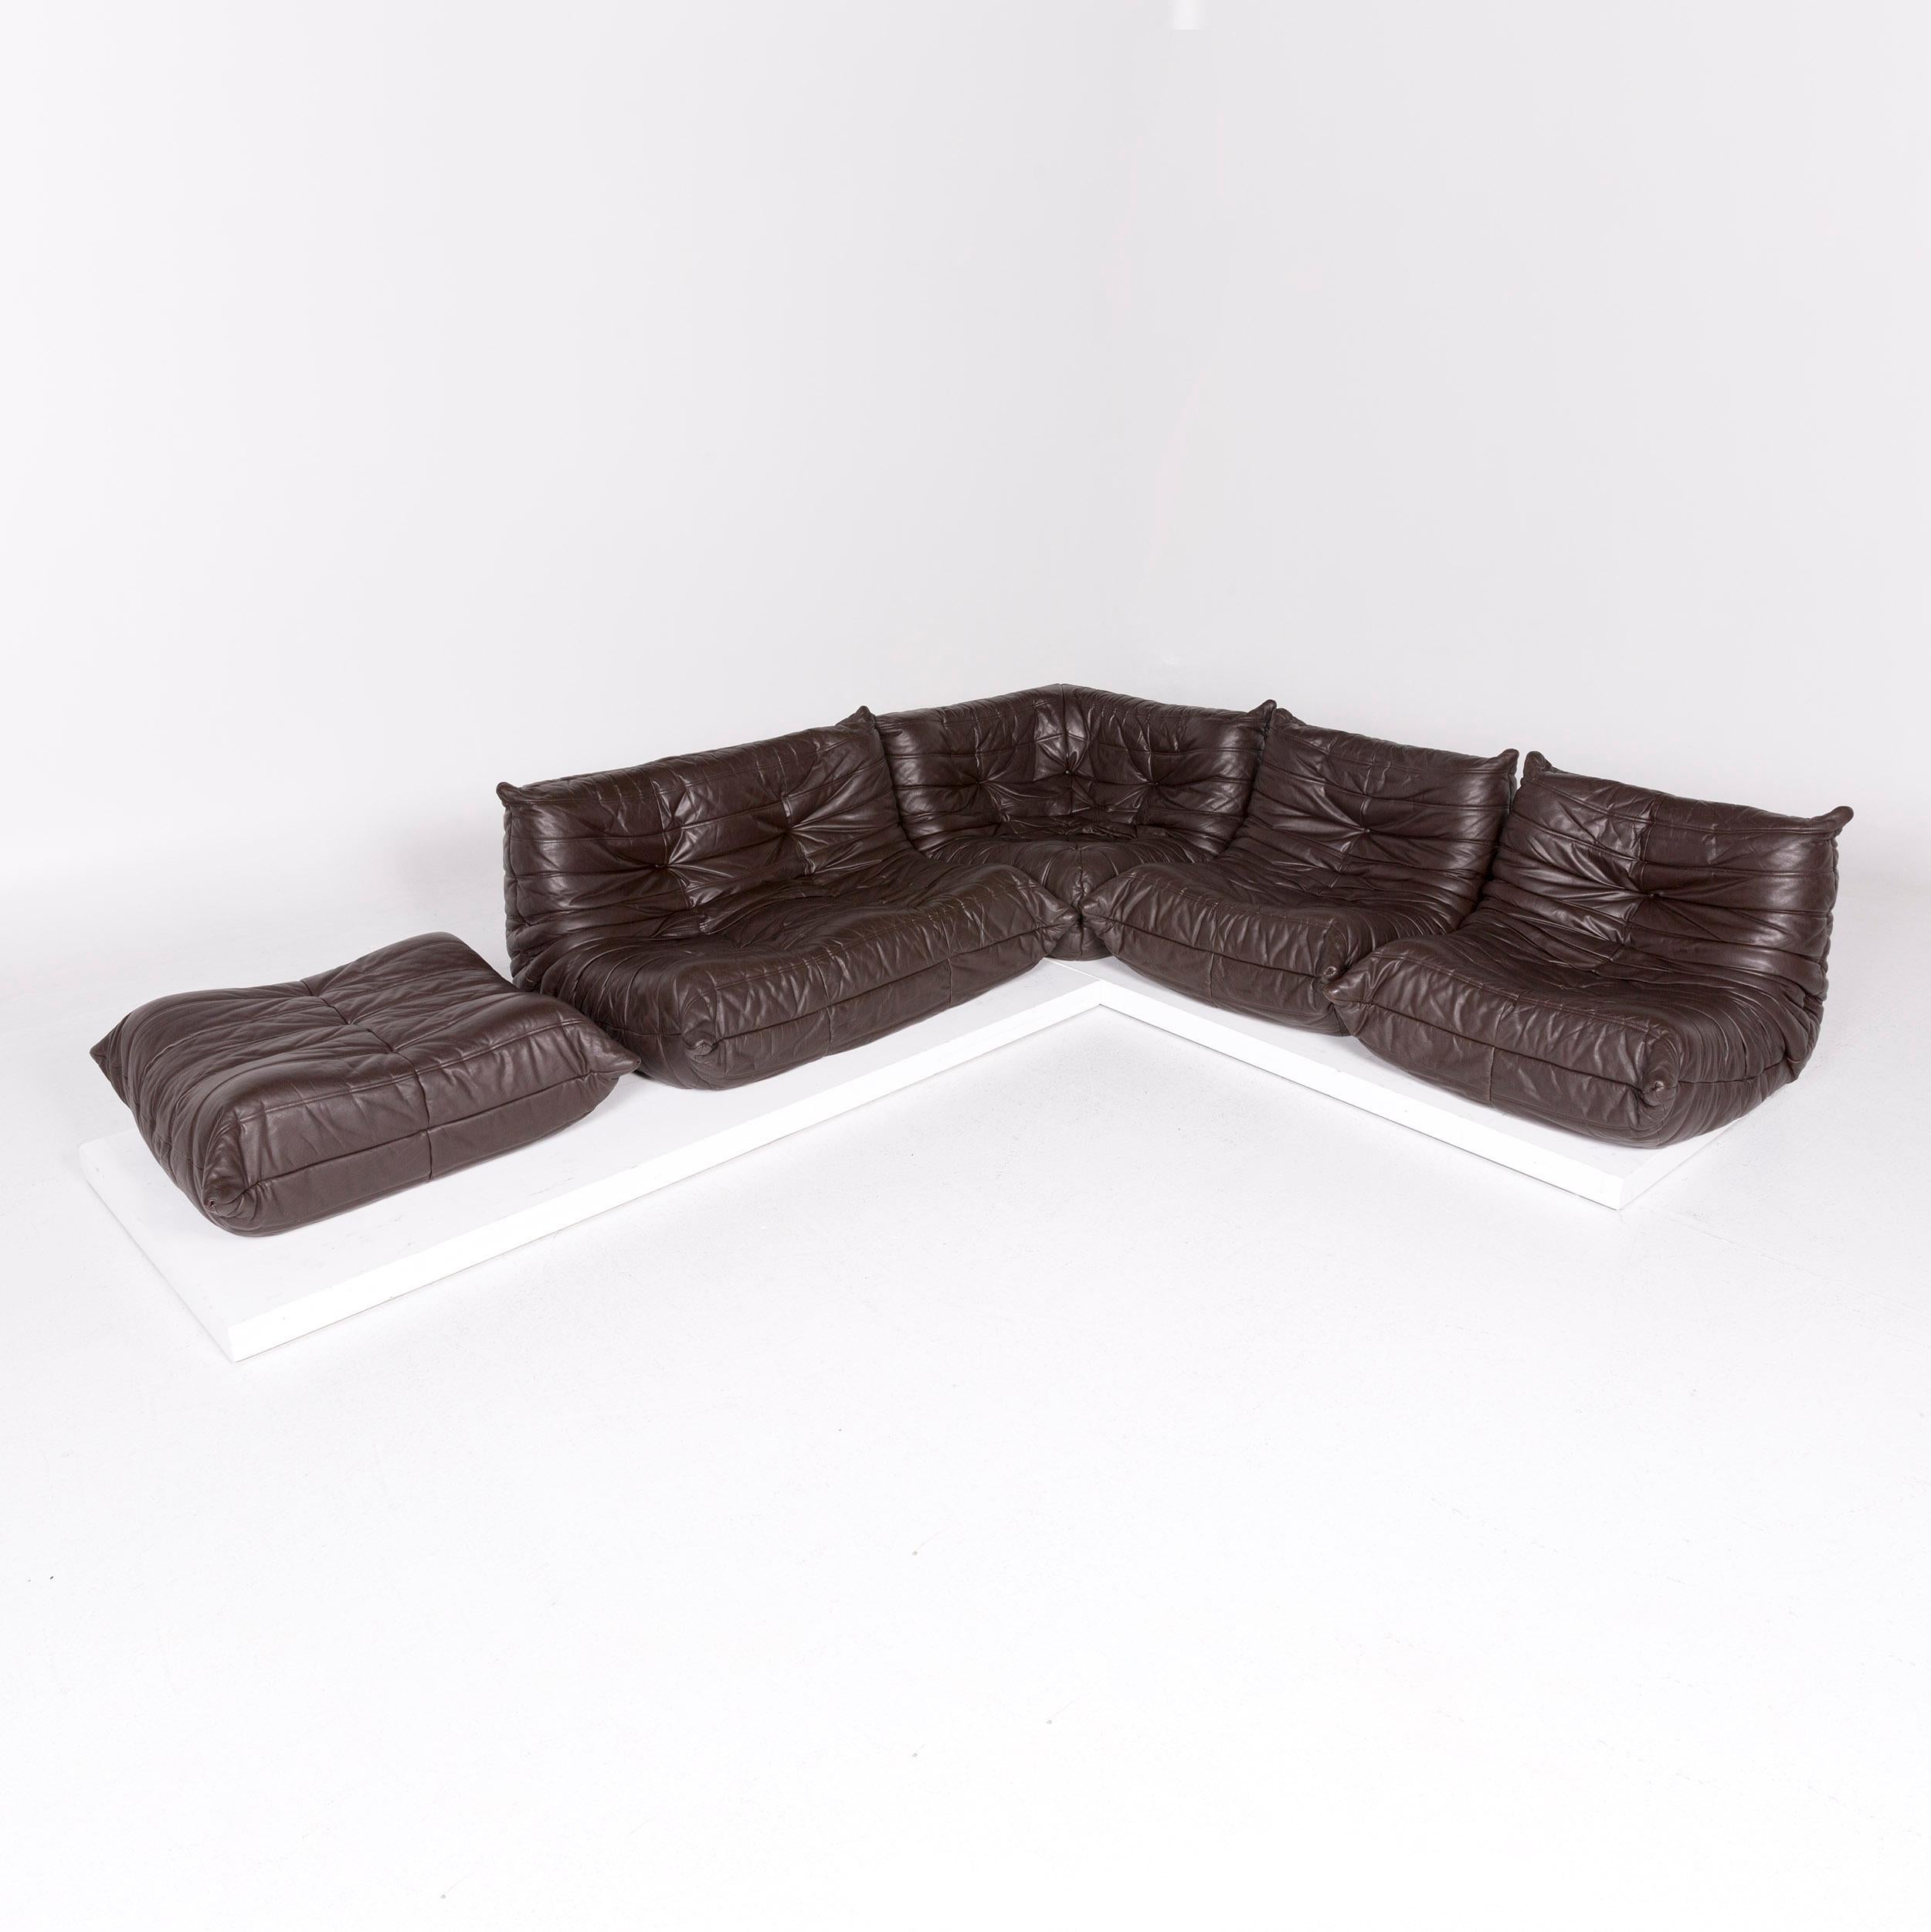 We bring to you a Ligne Roset Togo leather corner sofa incl. footstool brown dark brown sofa.
 
 Product measurements in centimeters:
 
Depth 95
Width 278
Height 65
Seat-height 32
Rest-height
Seat-depth 61
Seat-width 200
Back-height 38.
 